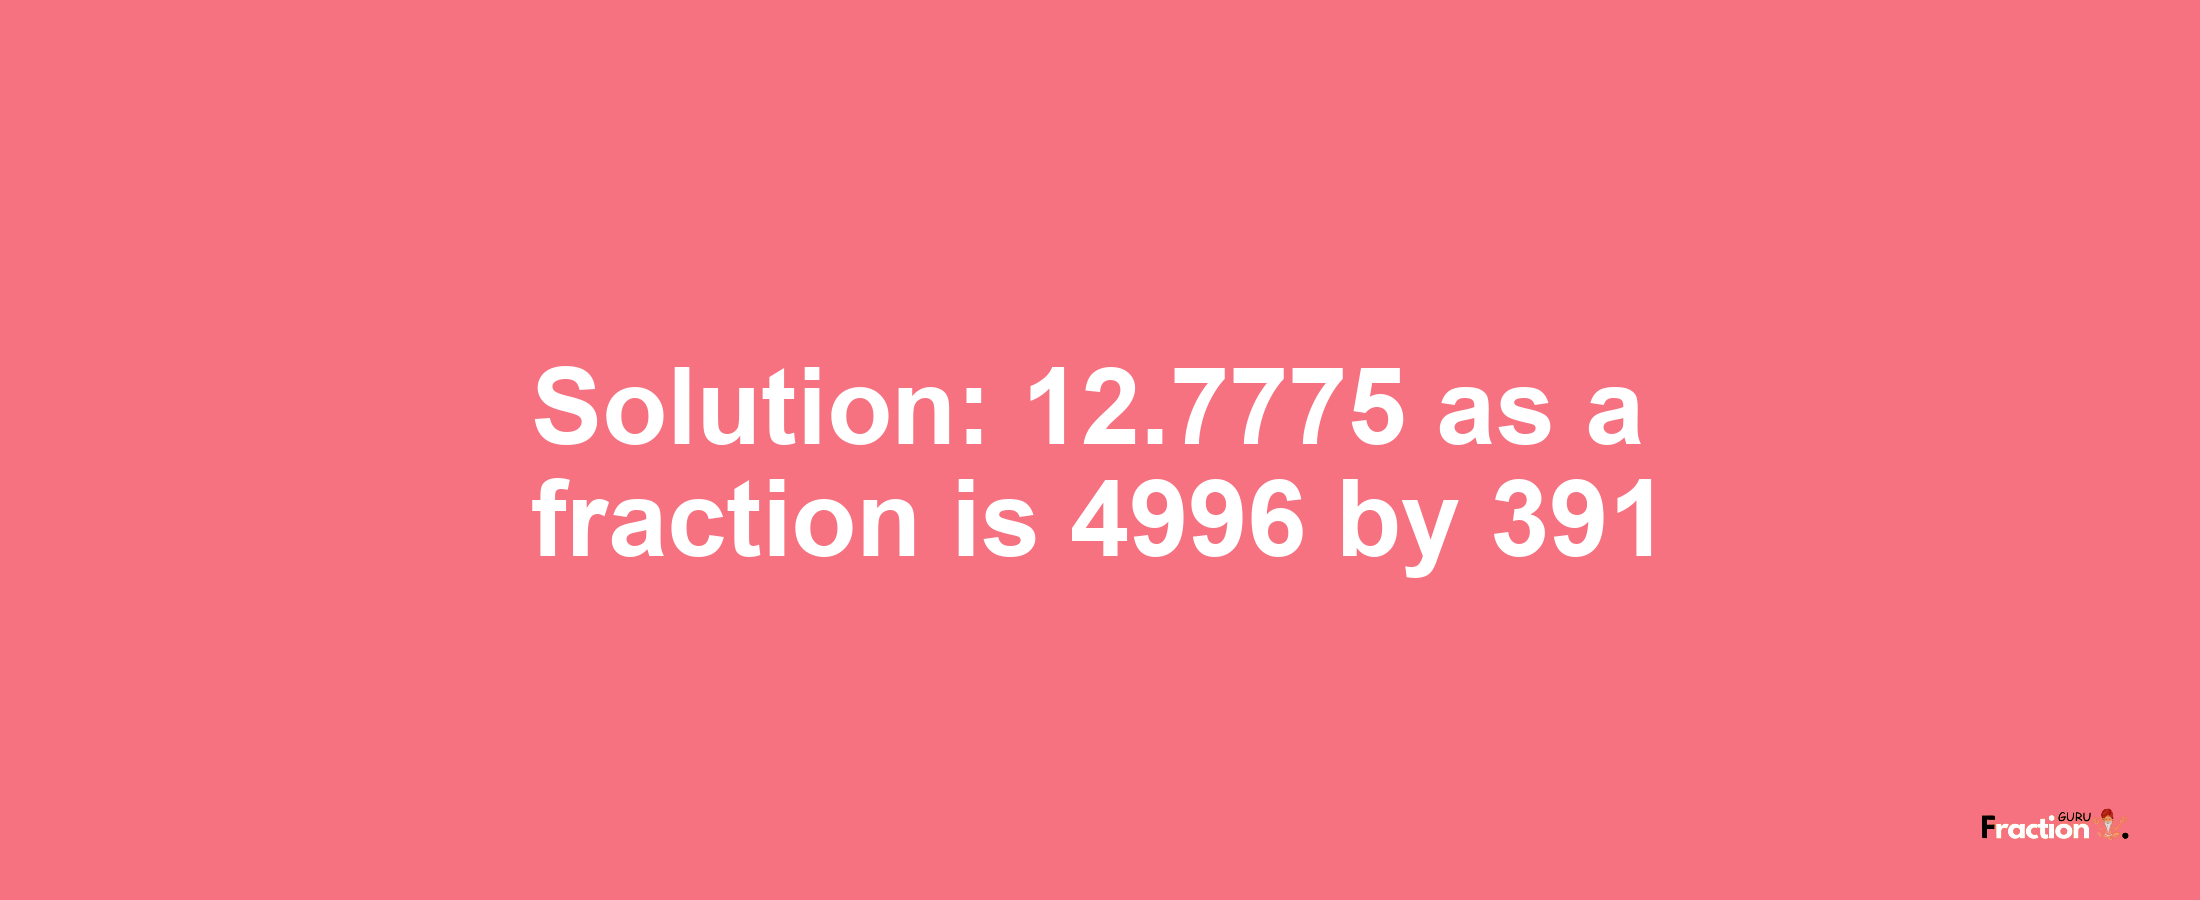 Solution:12.7775 as a fraction is 4996/391